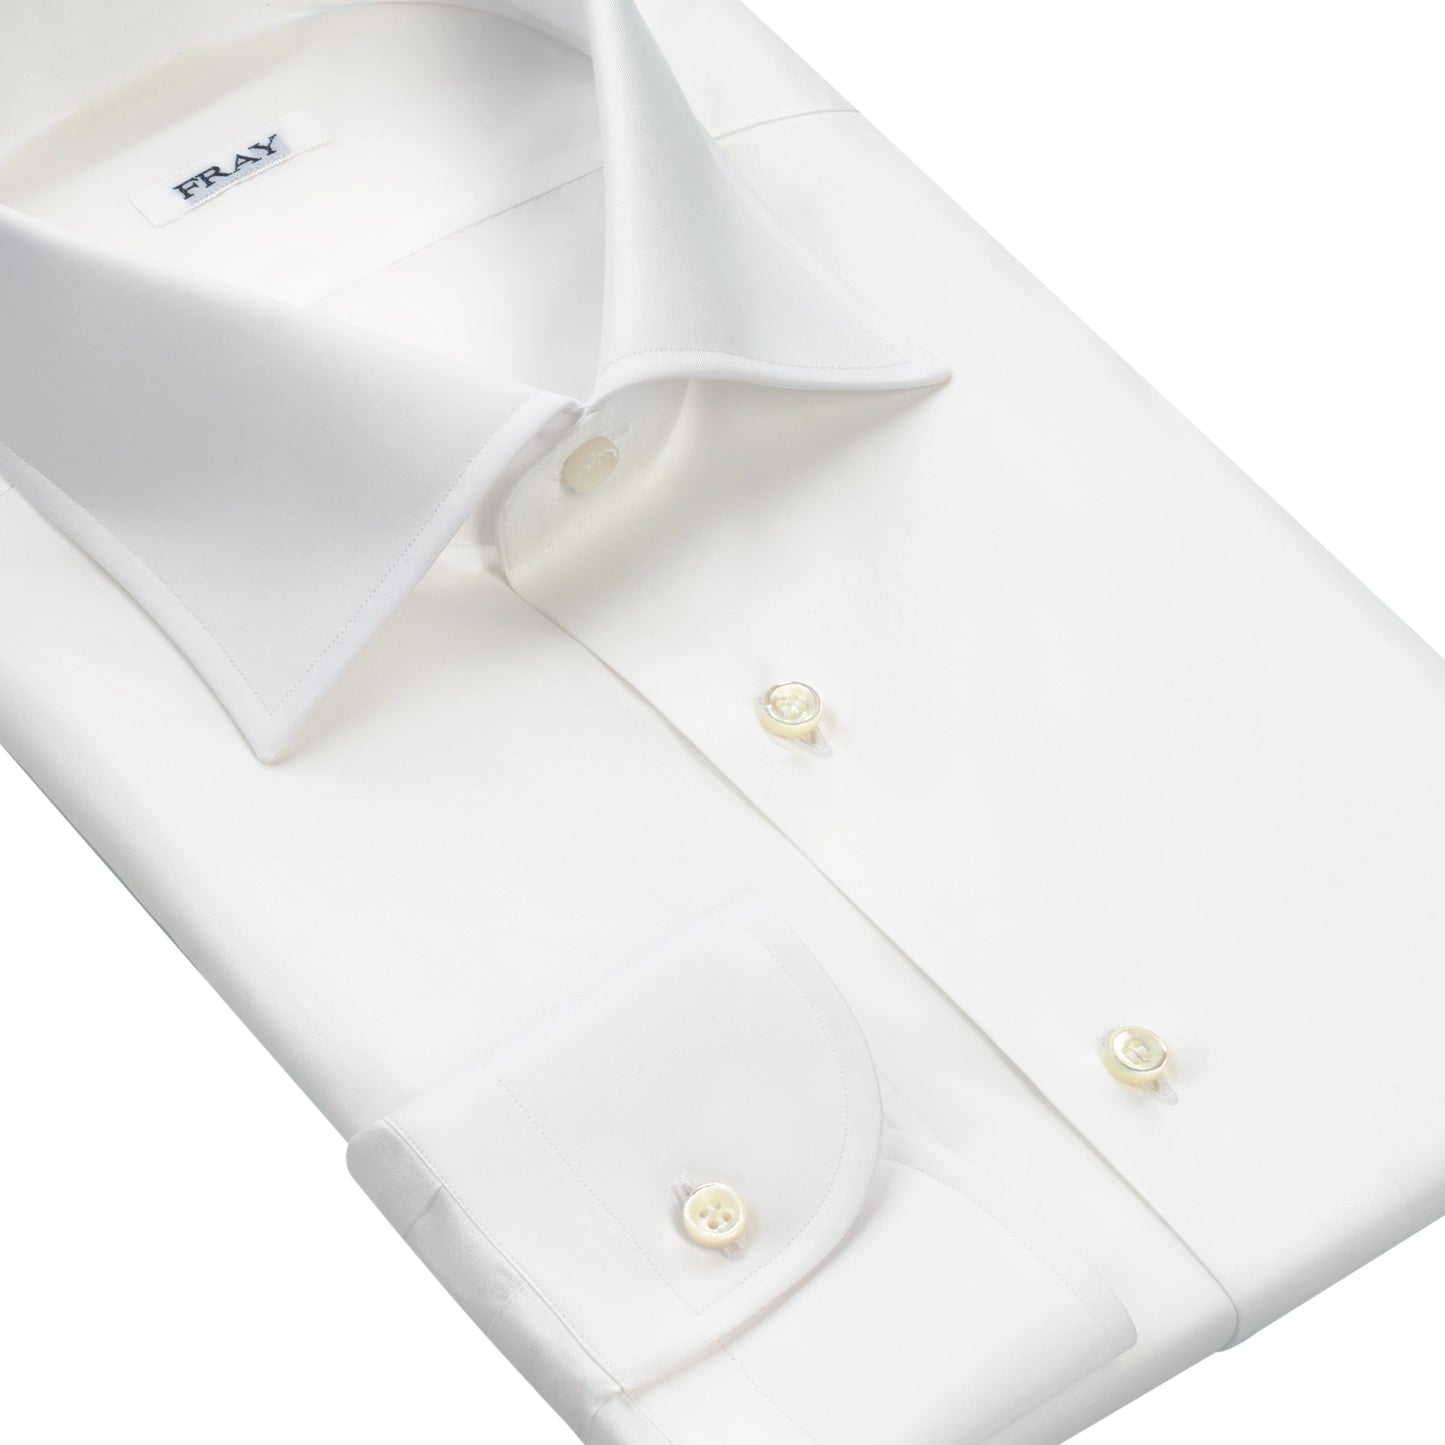 Classic Cotton Shirt in White with Spread Collar